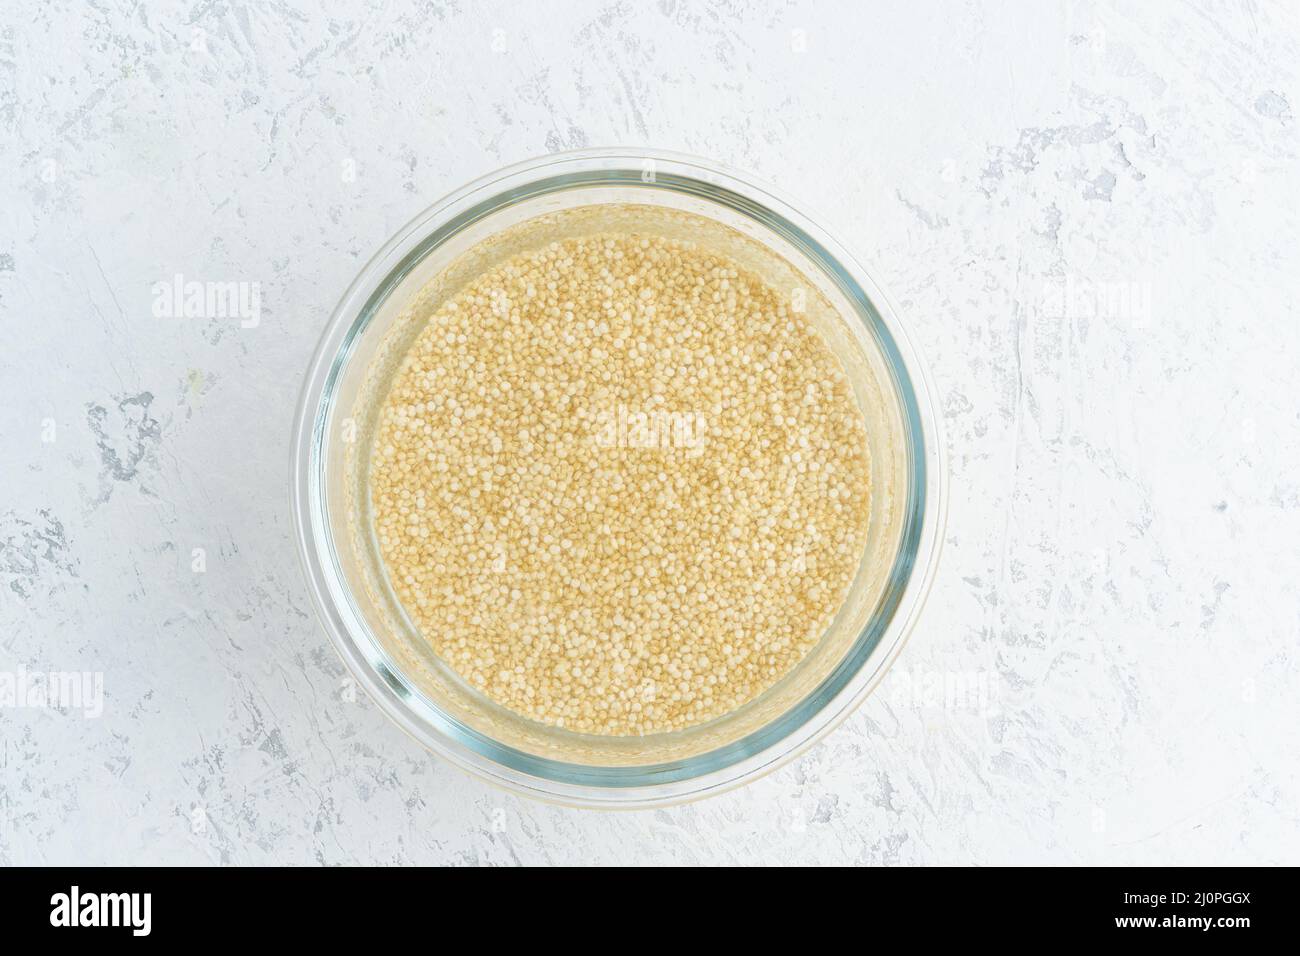 Soaking quinoa cereal in water to ferment cereals and neutralize phytic acid Stock Photo